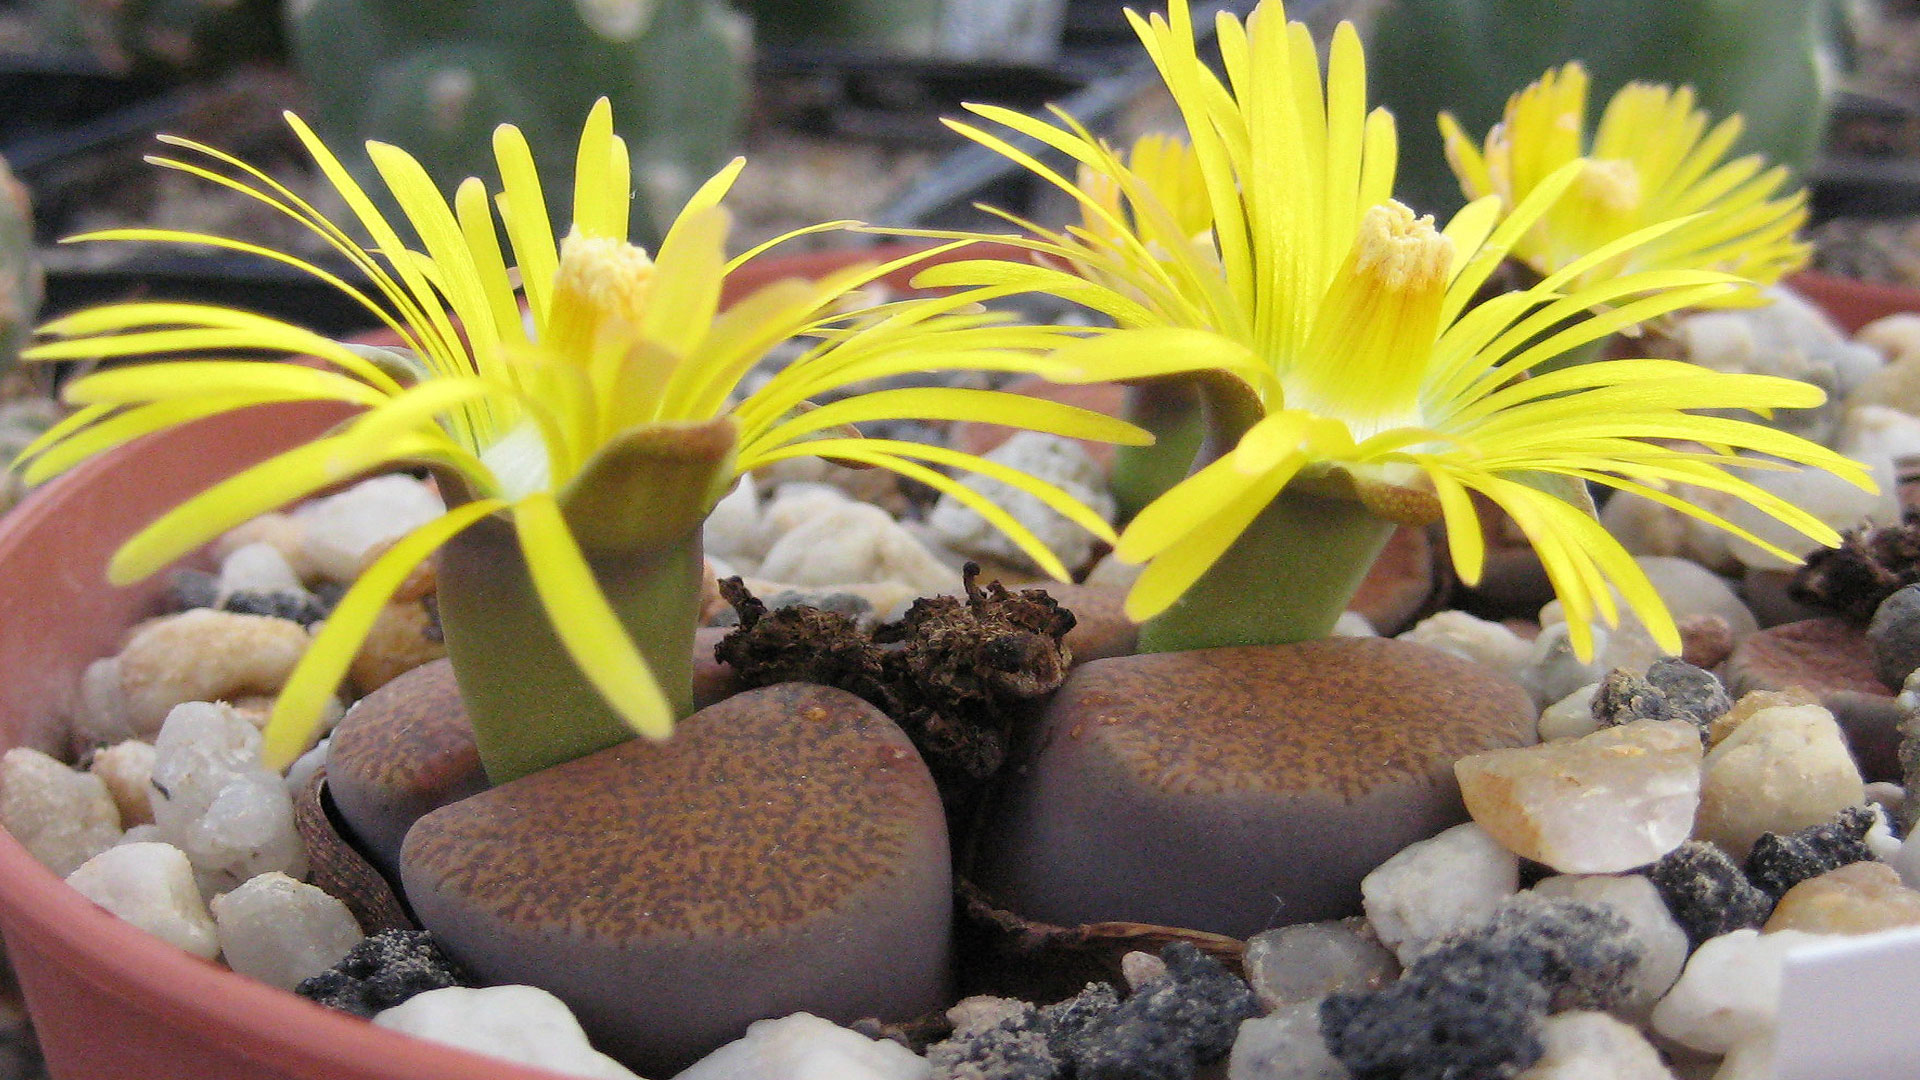 Lithops lesliei ssp.. Lithops lesliei ssp. lesliei v. mariae Cole-Nr. 141 in Kultur. © Michael Wolf, CC by-sa 3.0